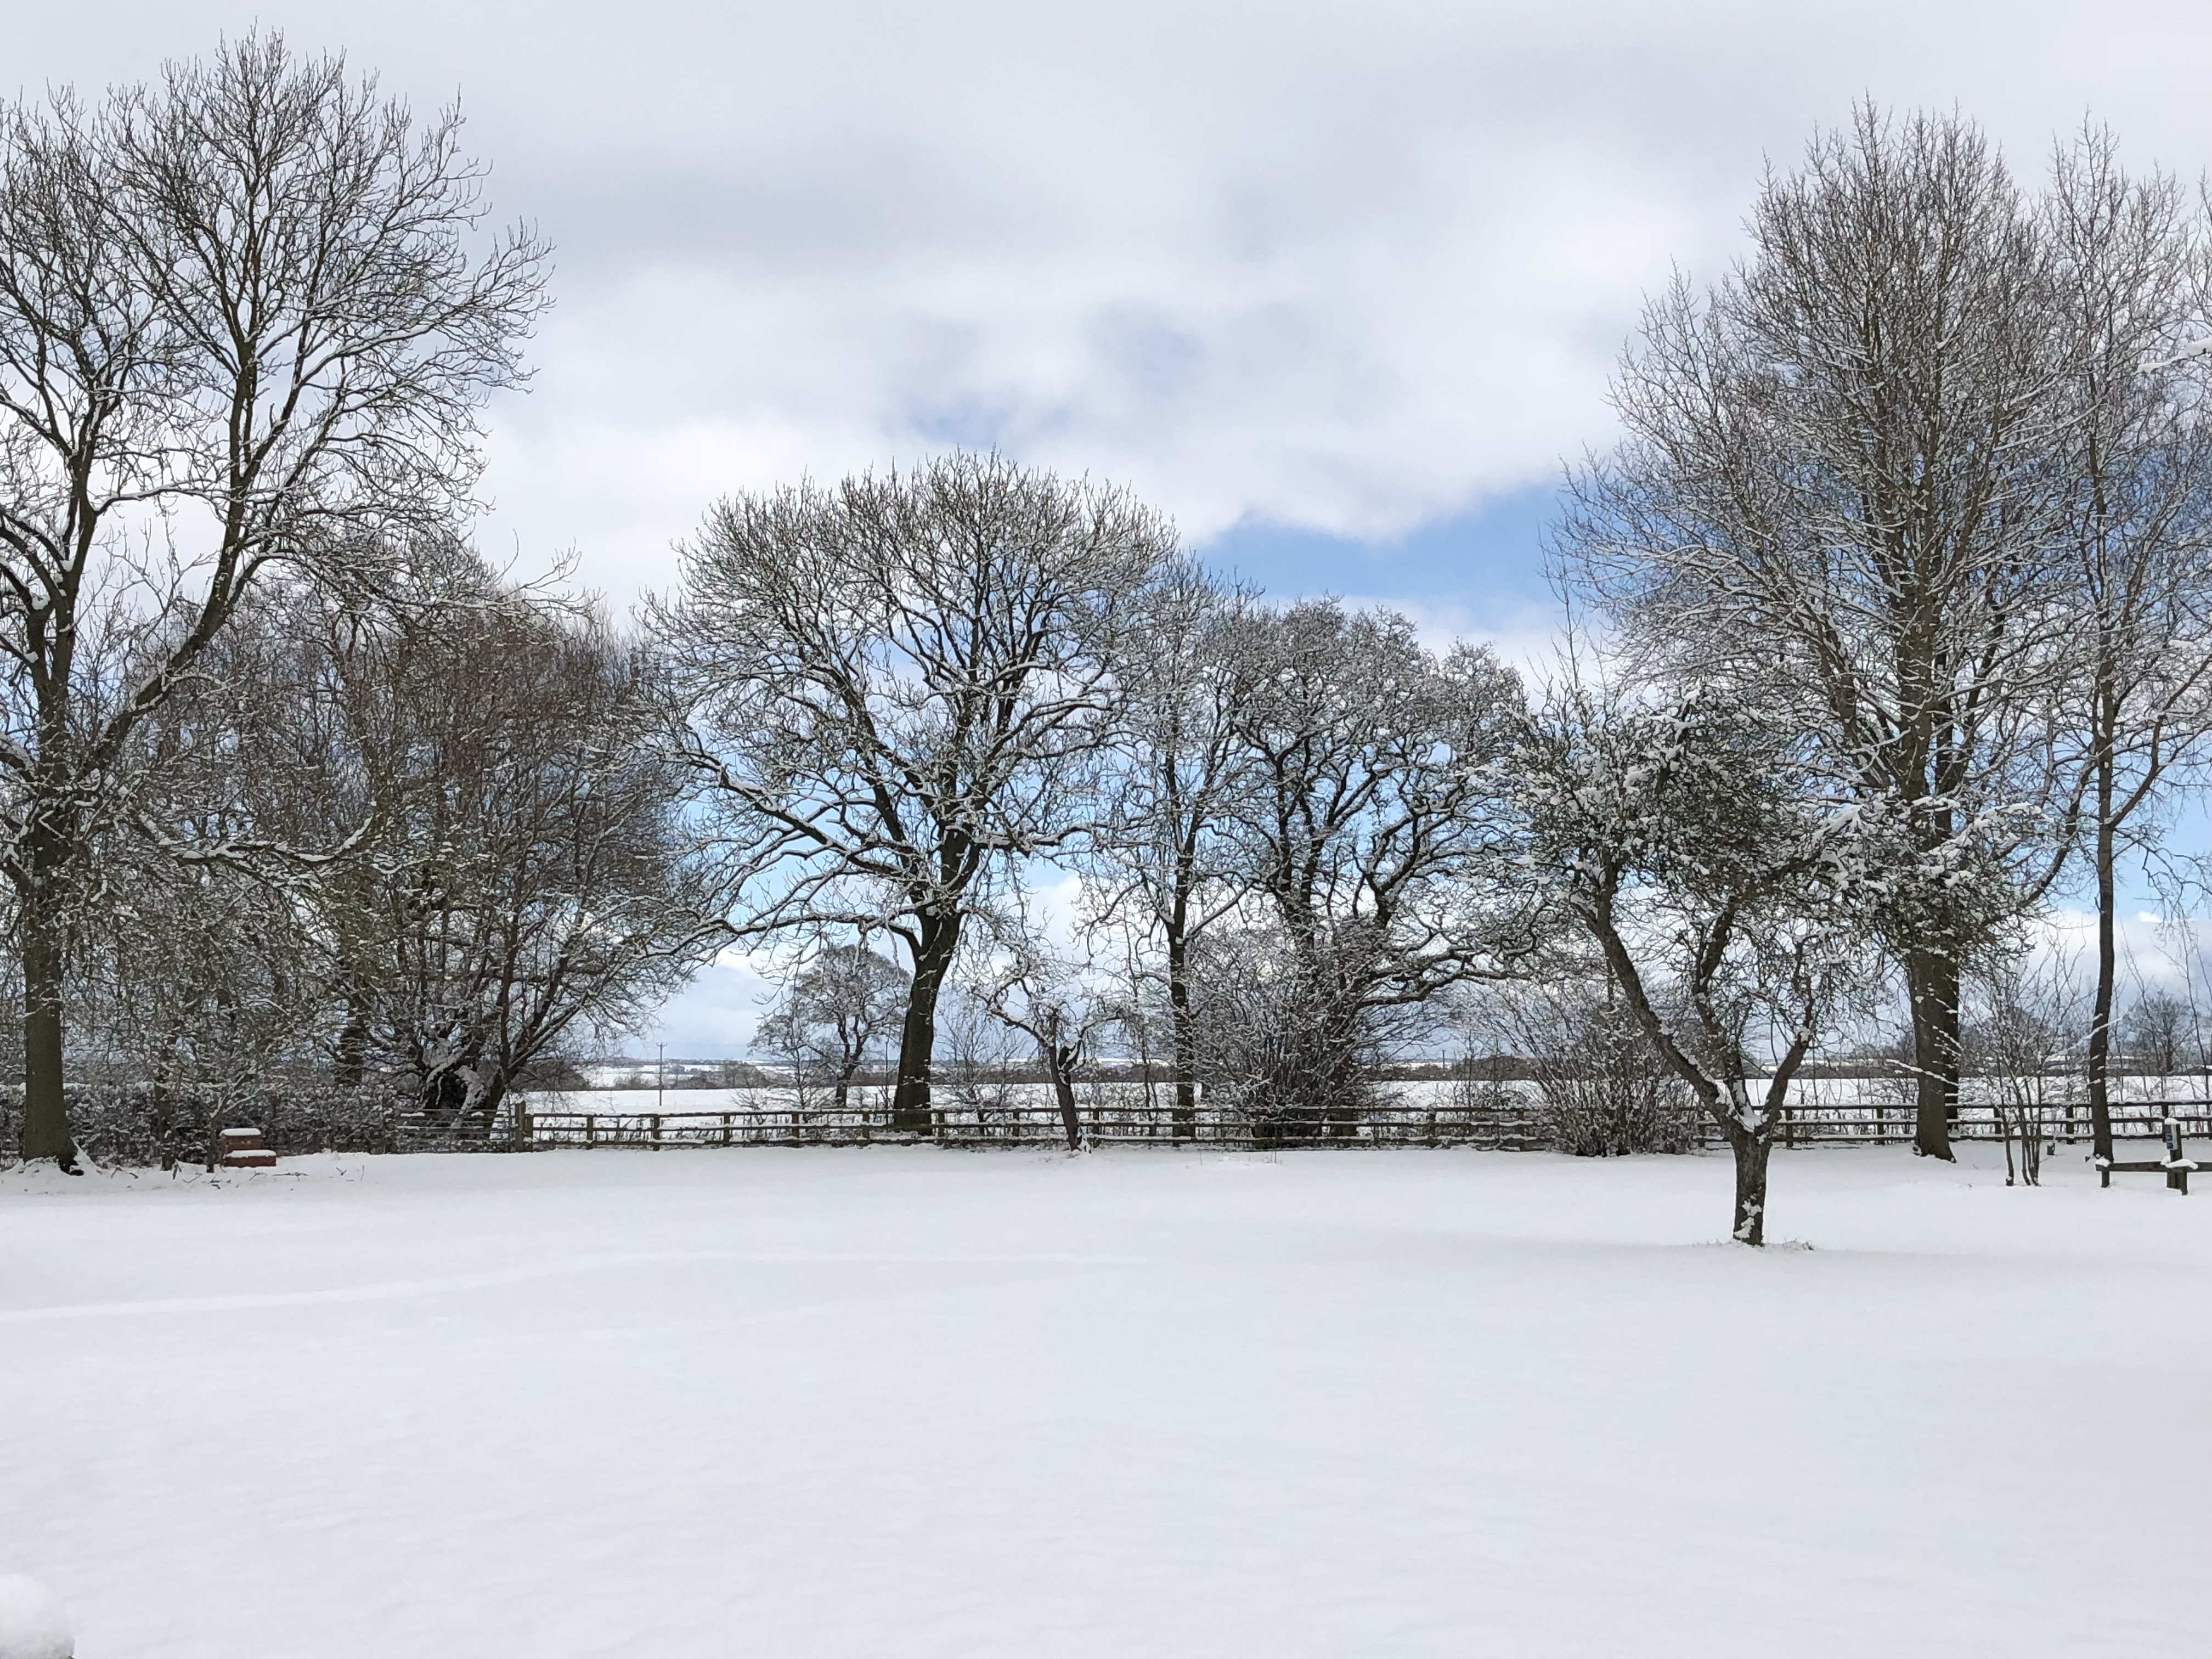 Our snow-covered orchard